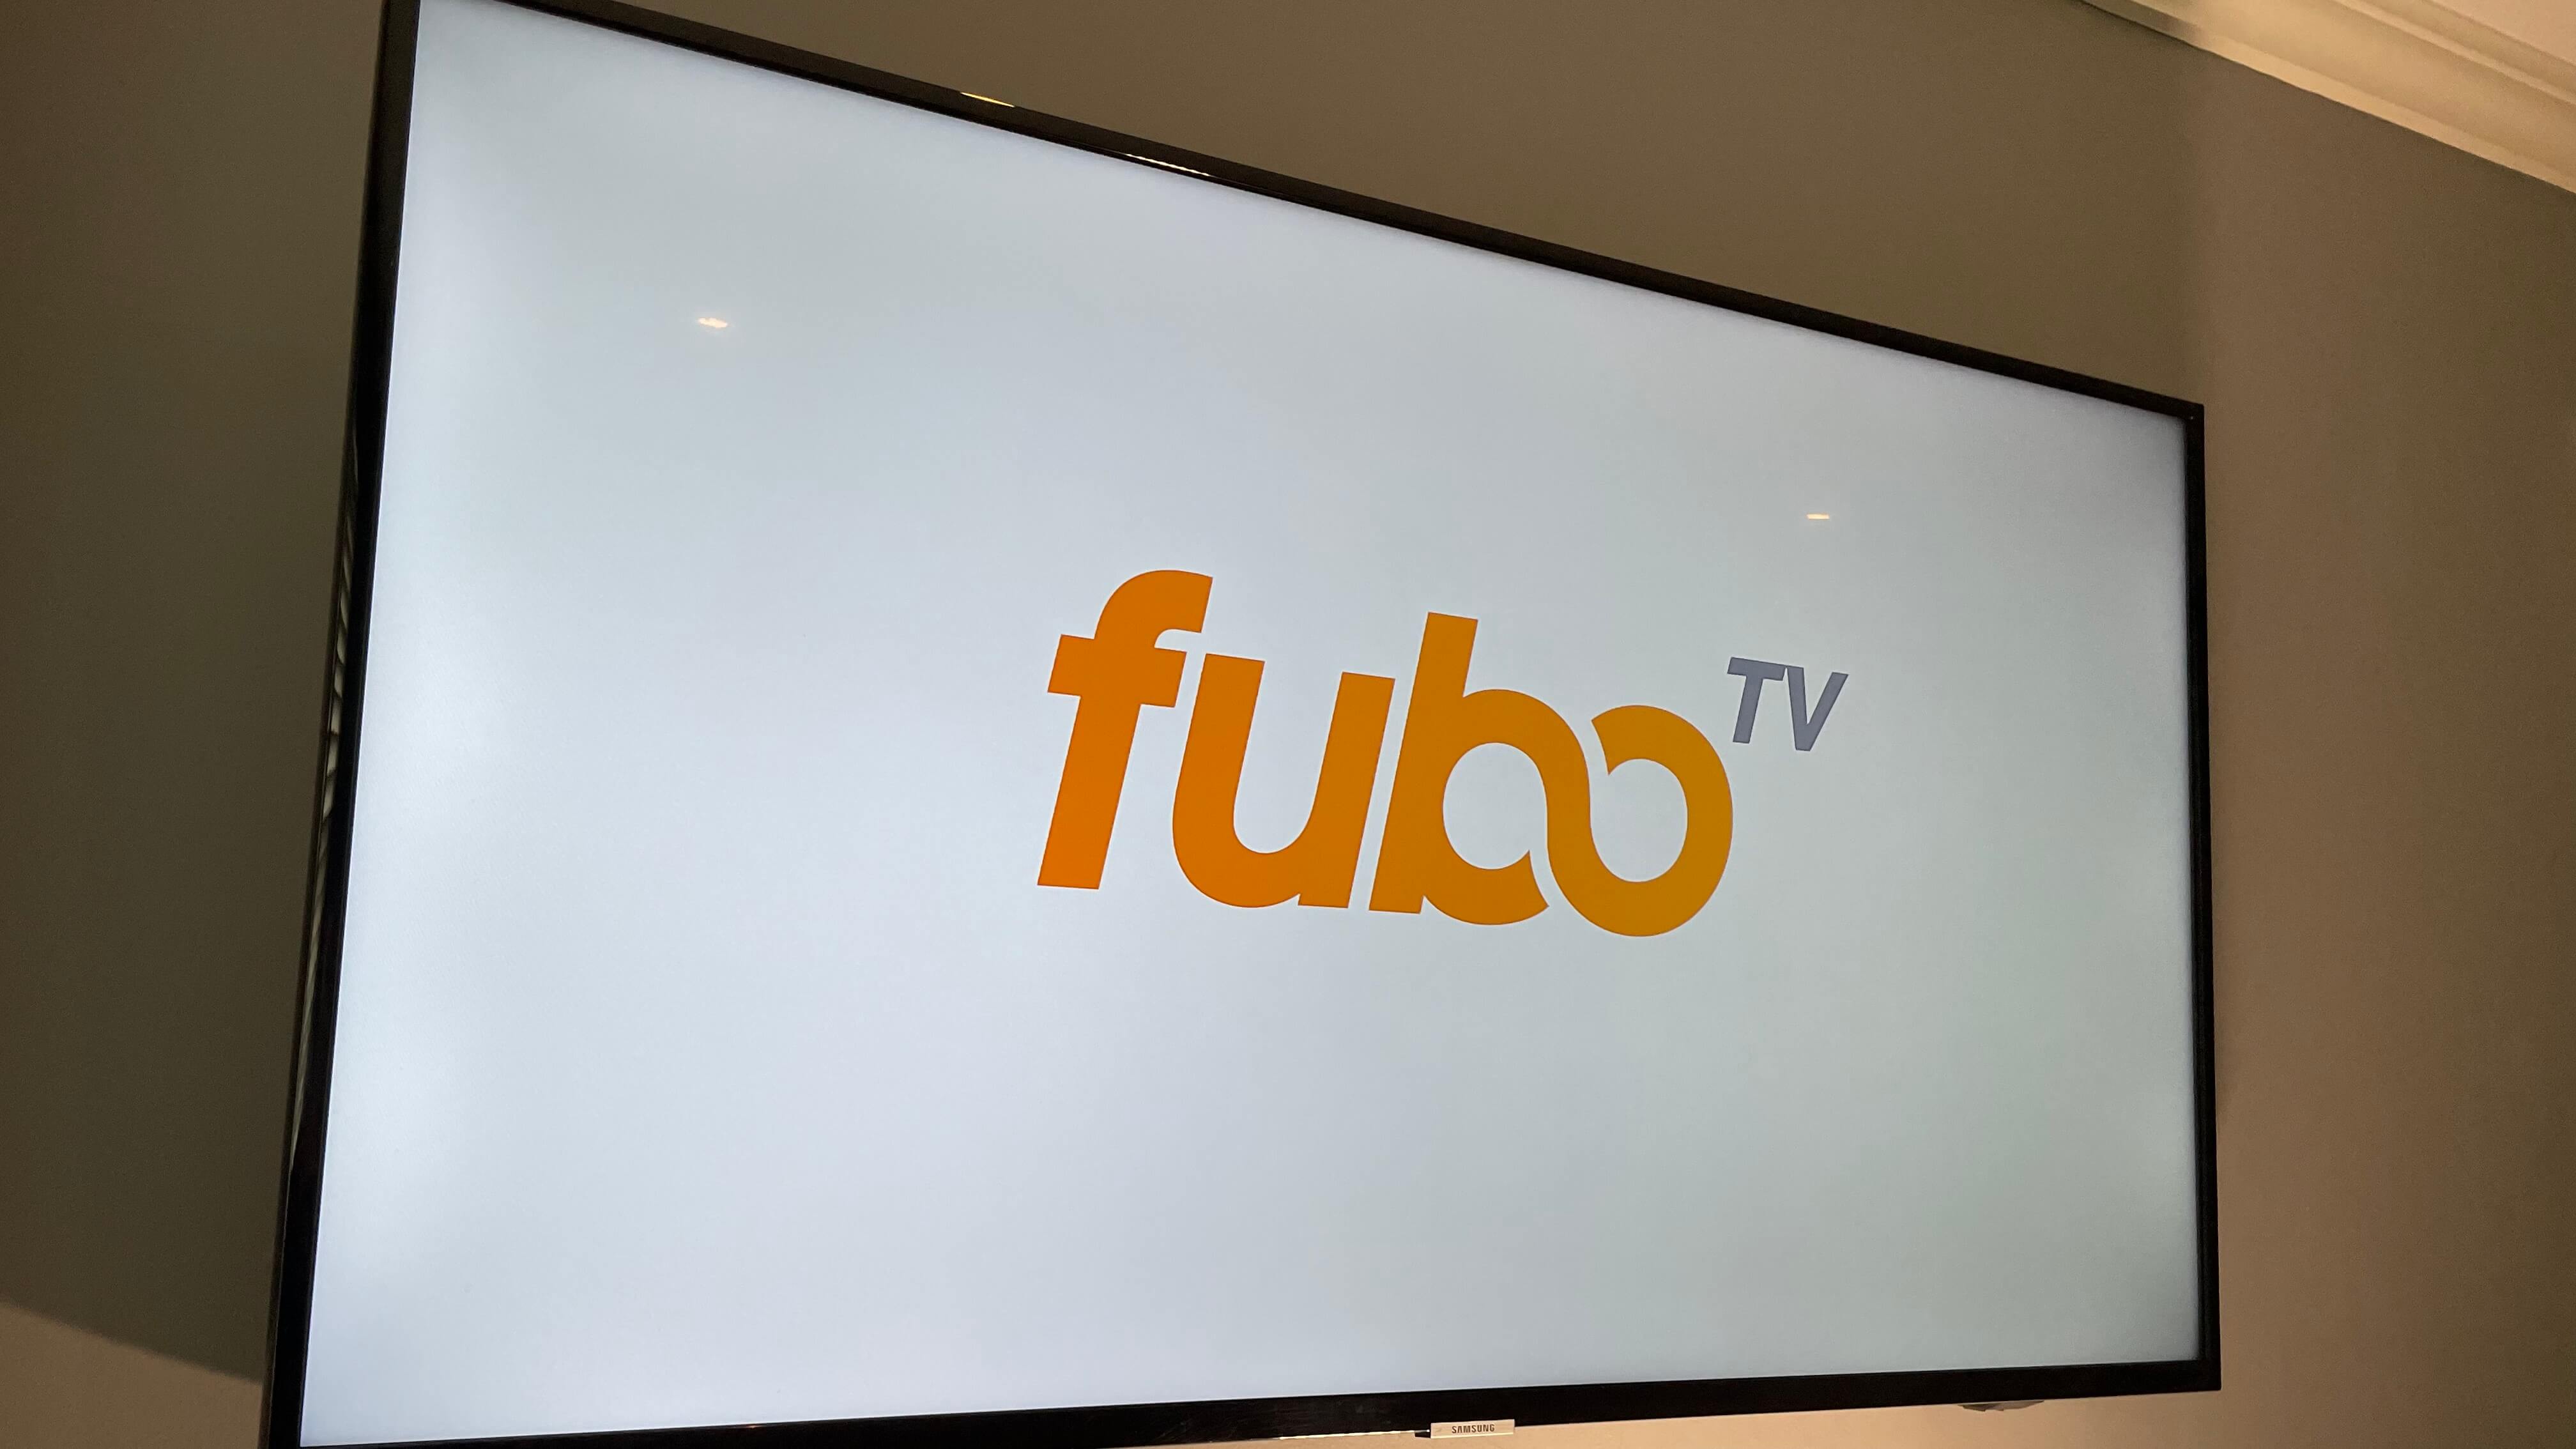 A Complete Guide to Fubos Packages and Pricing 2023